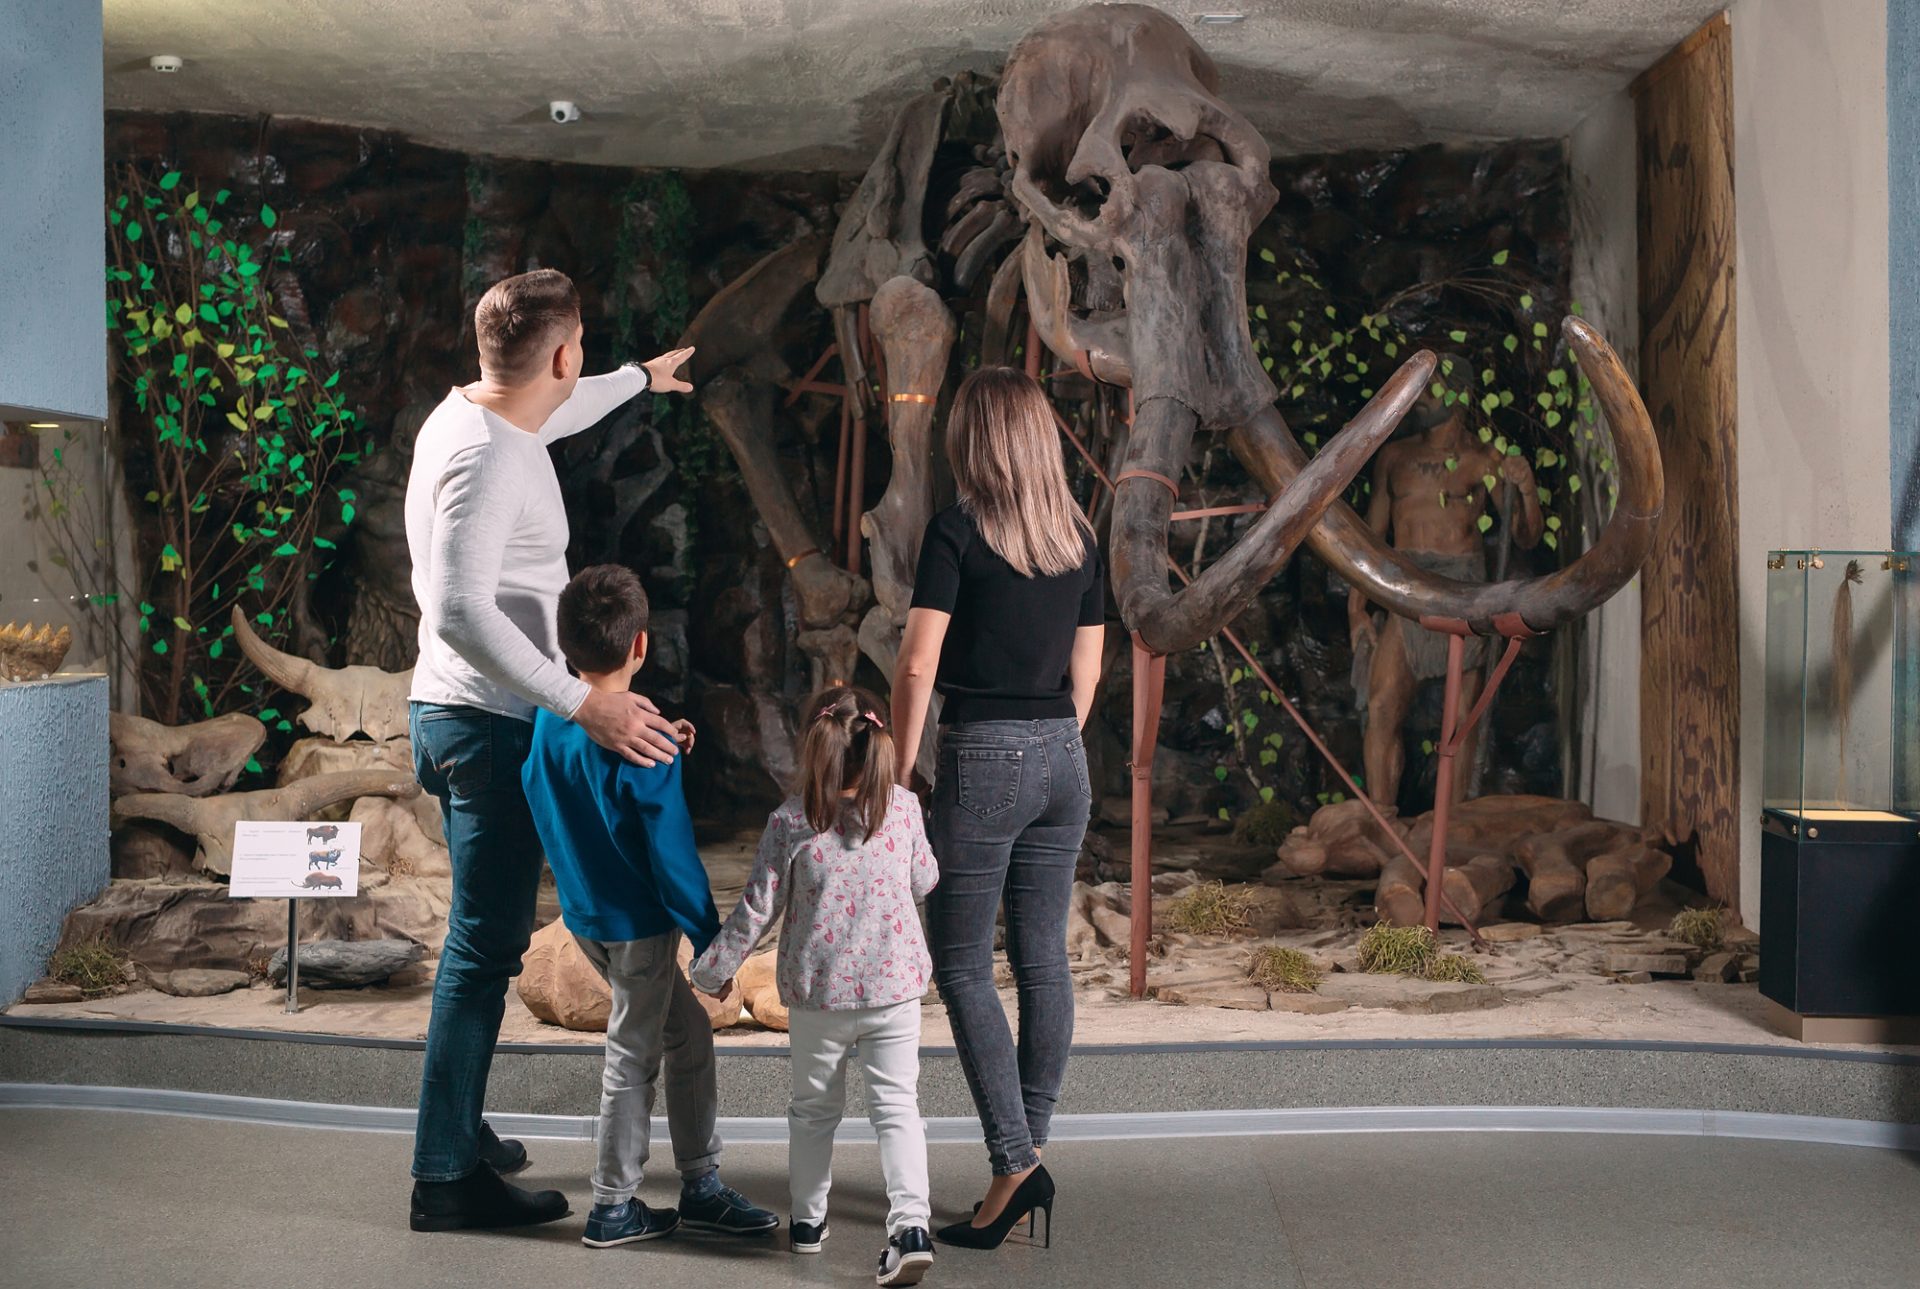 Family outing to the museum. In the prehistoric era, a family poses with an elderly elephant.